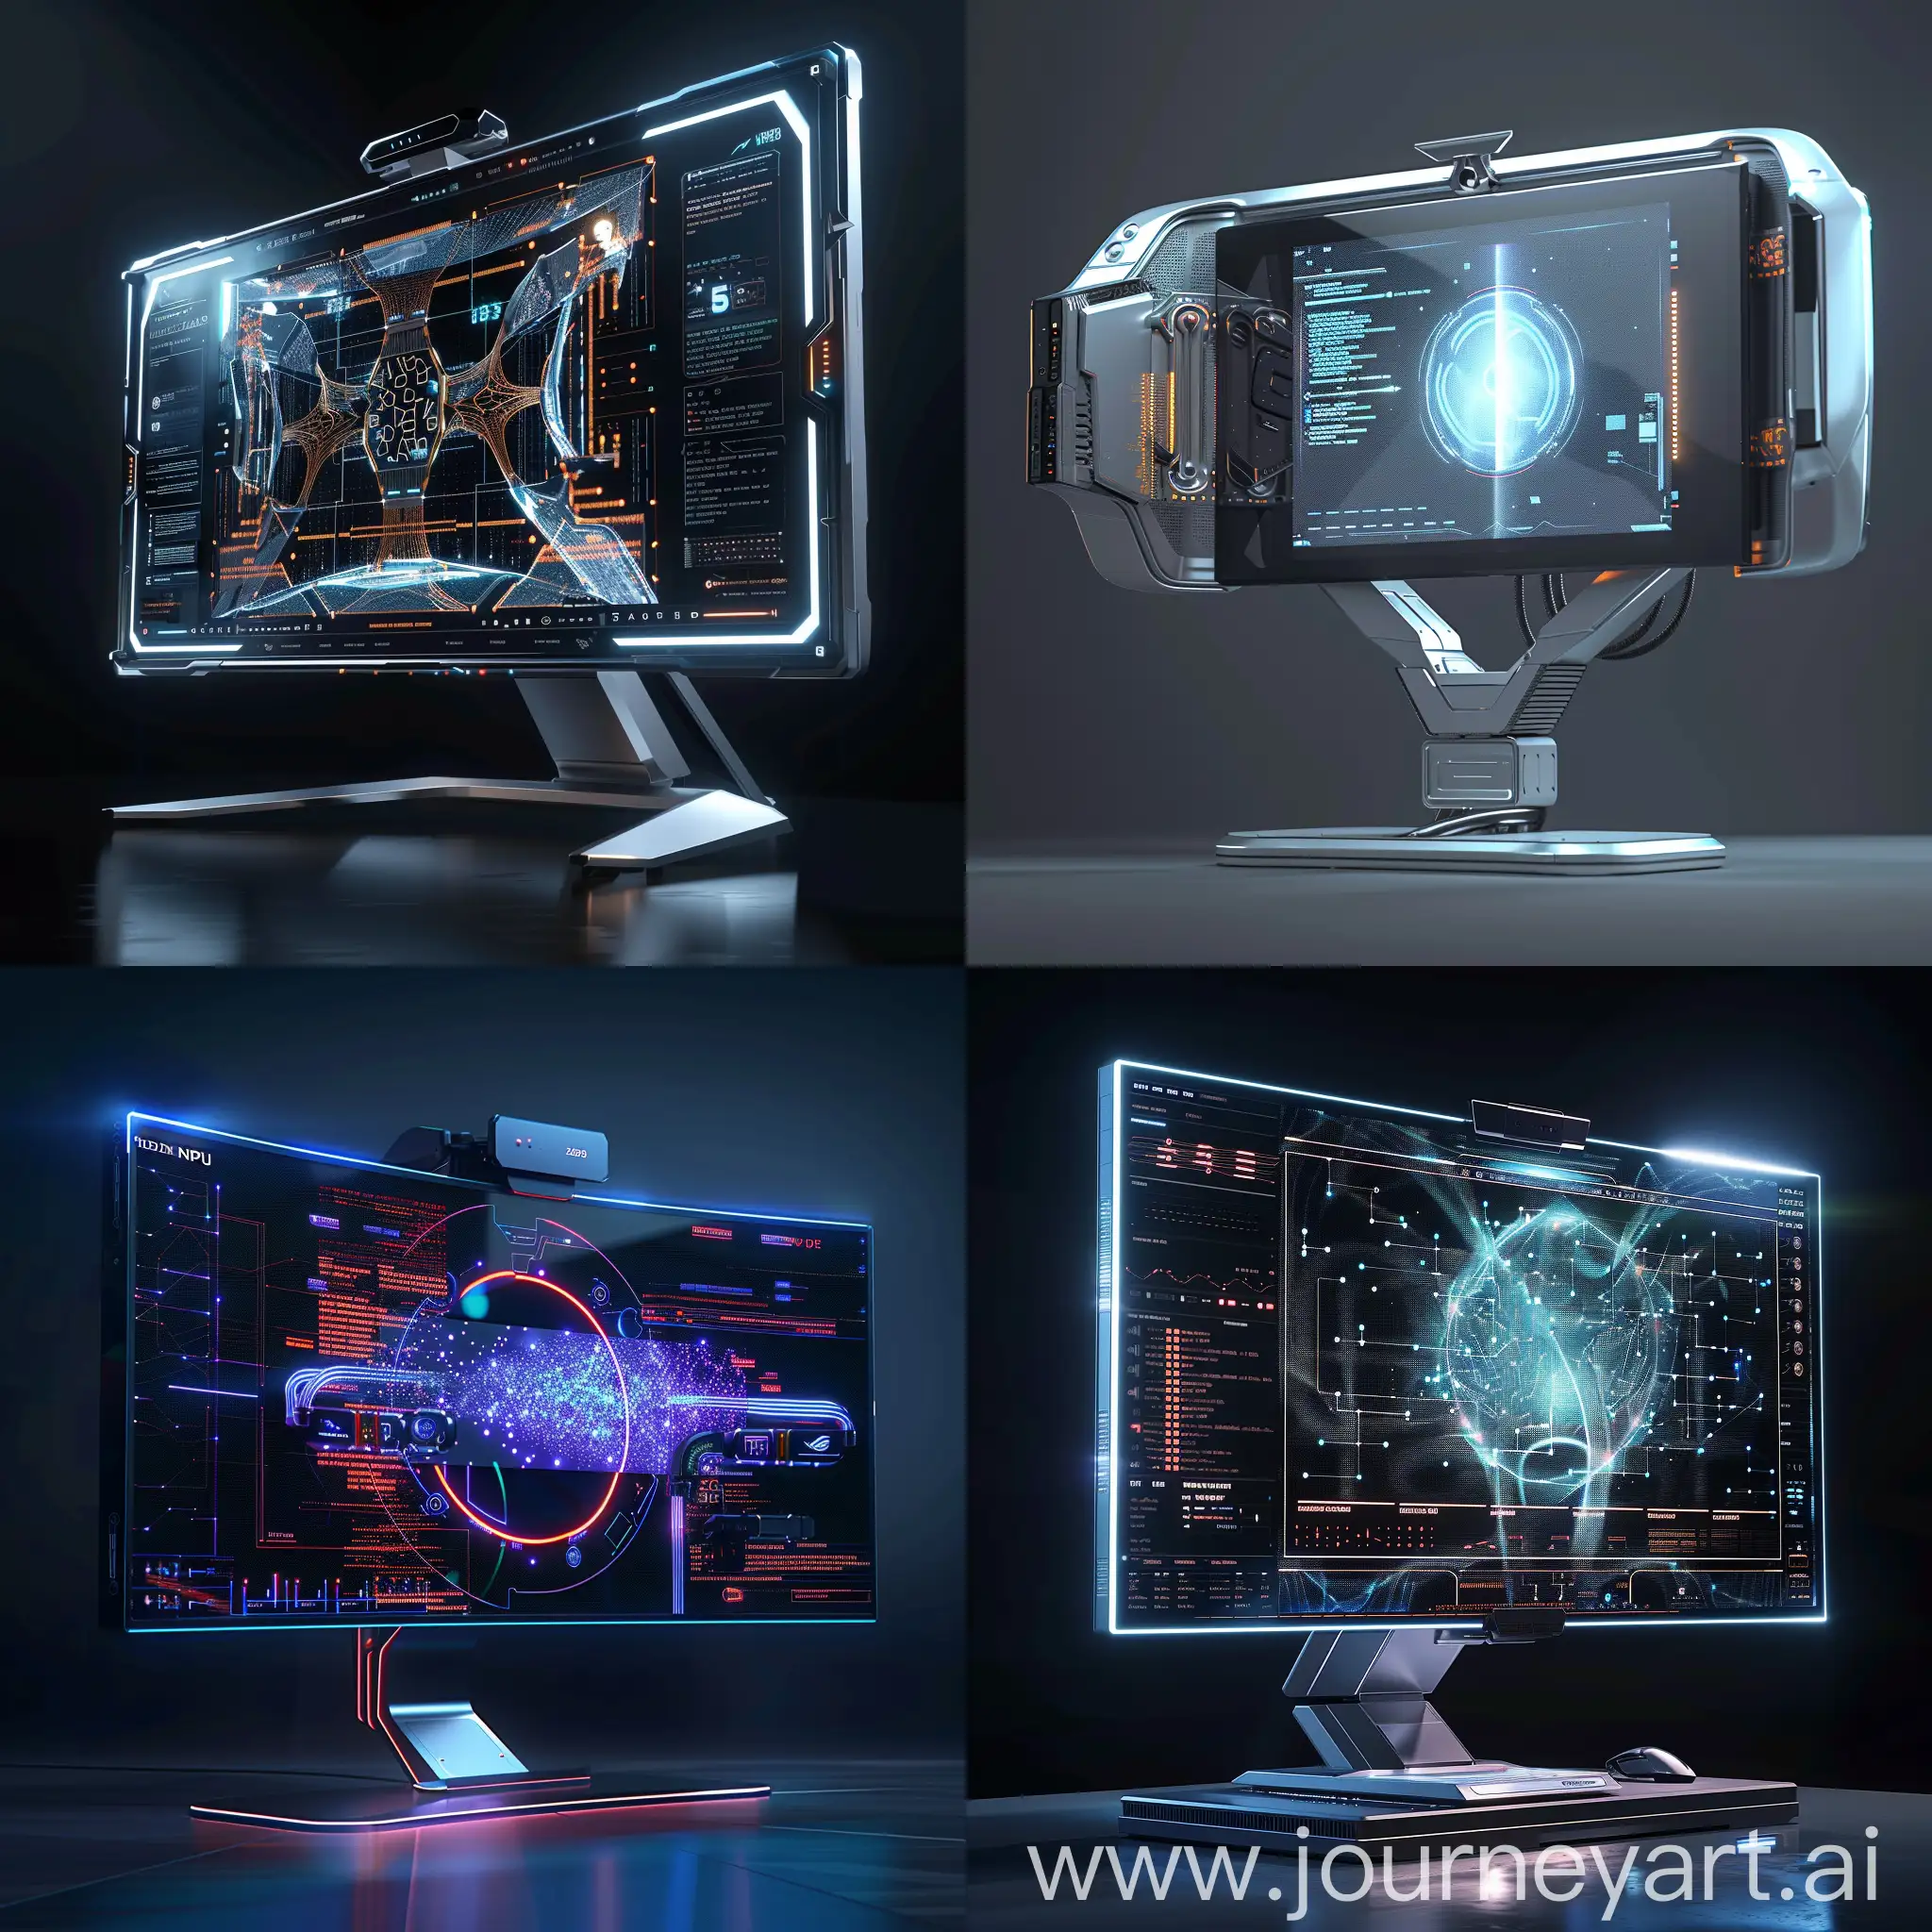 Futuristic-PC-Monitor-with-Quantum-Dot-Display-Technology-and-Holographic-Projection